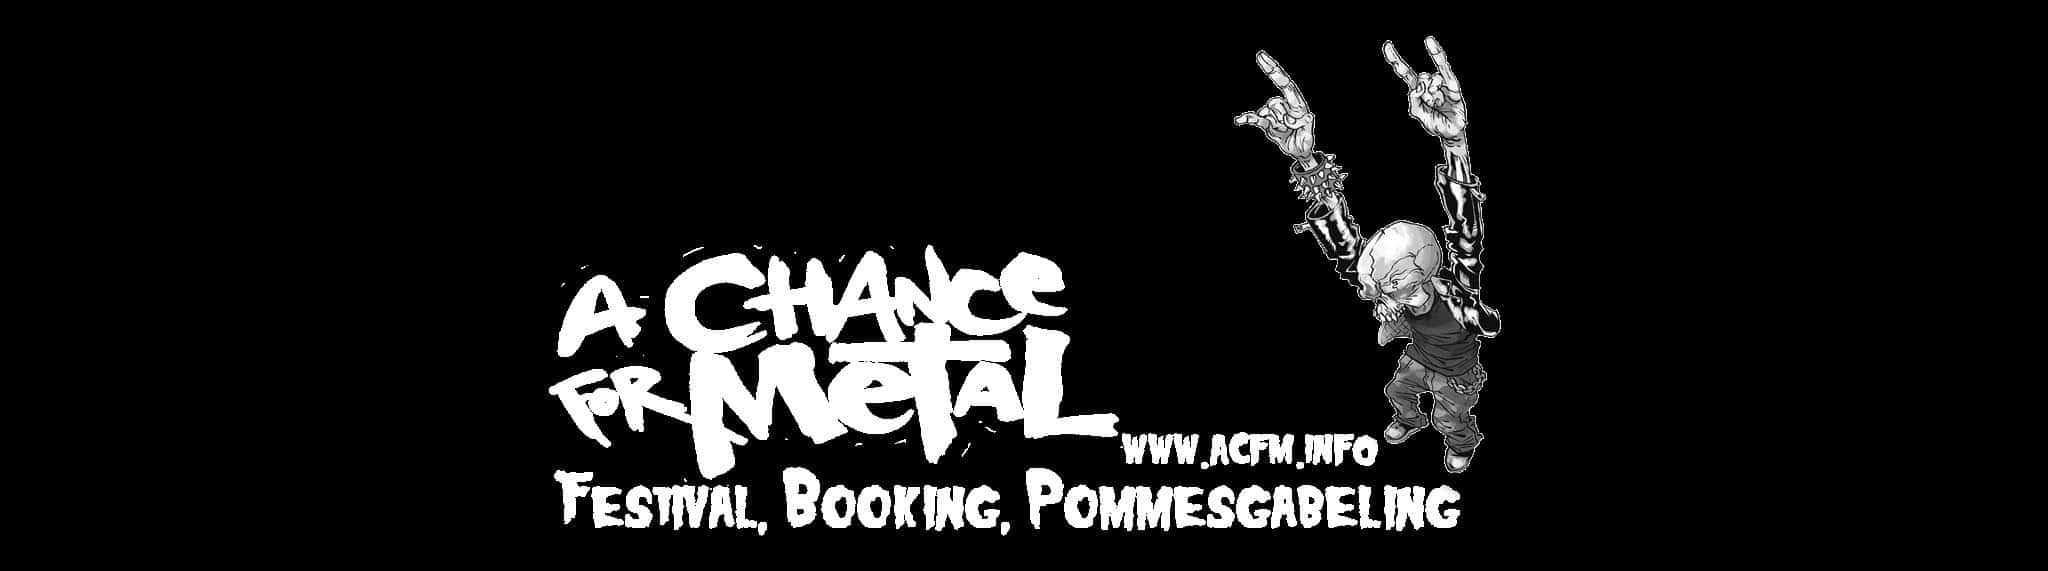 A CHANCE FOR METAL